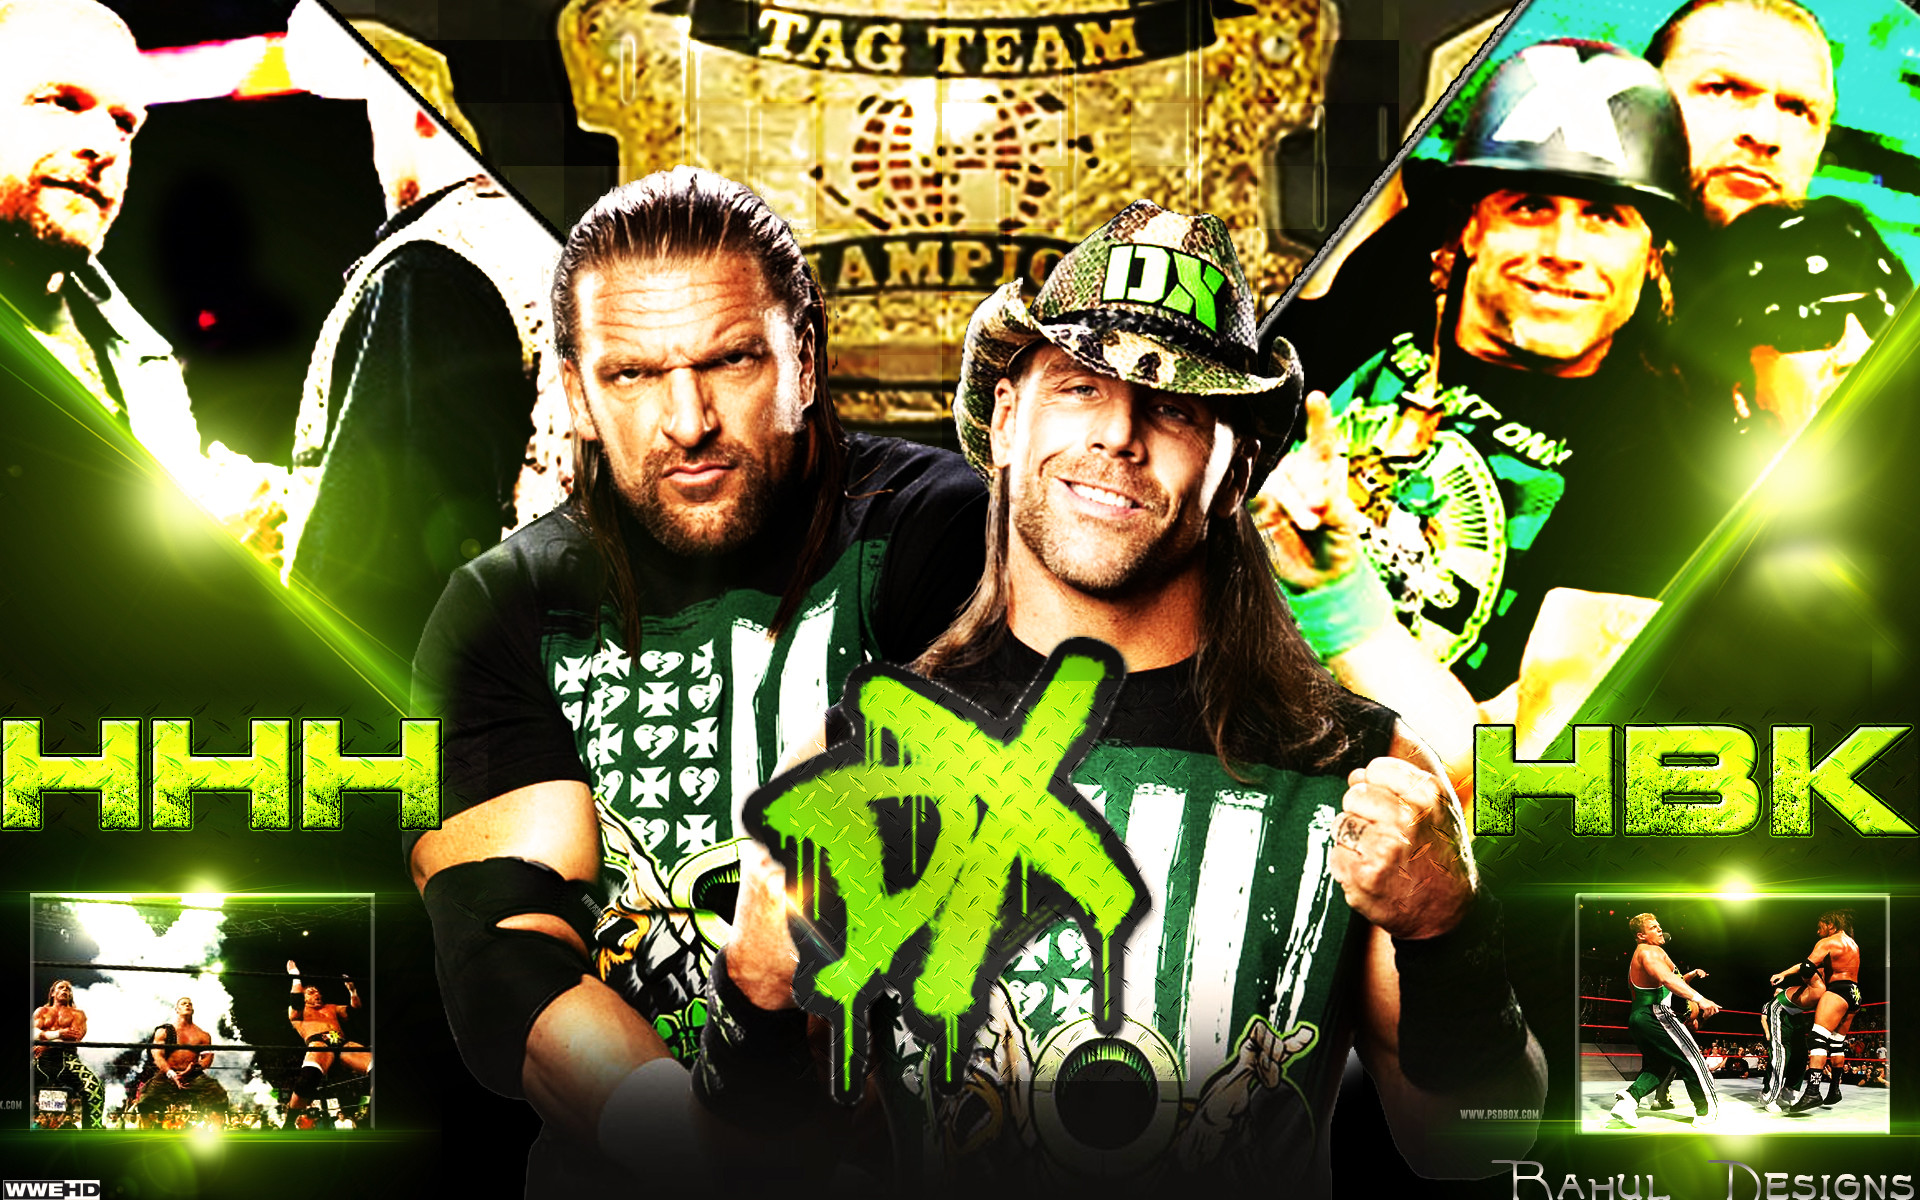 WWE Dx Wallpaper (63+ pictures)